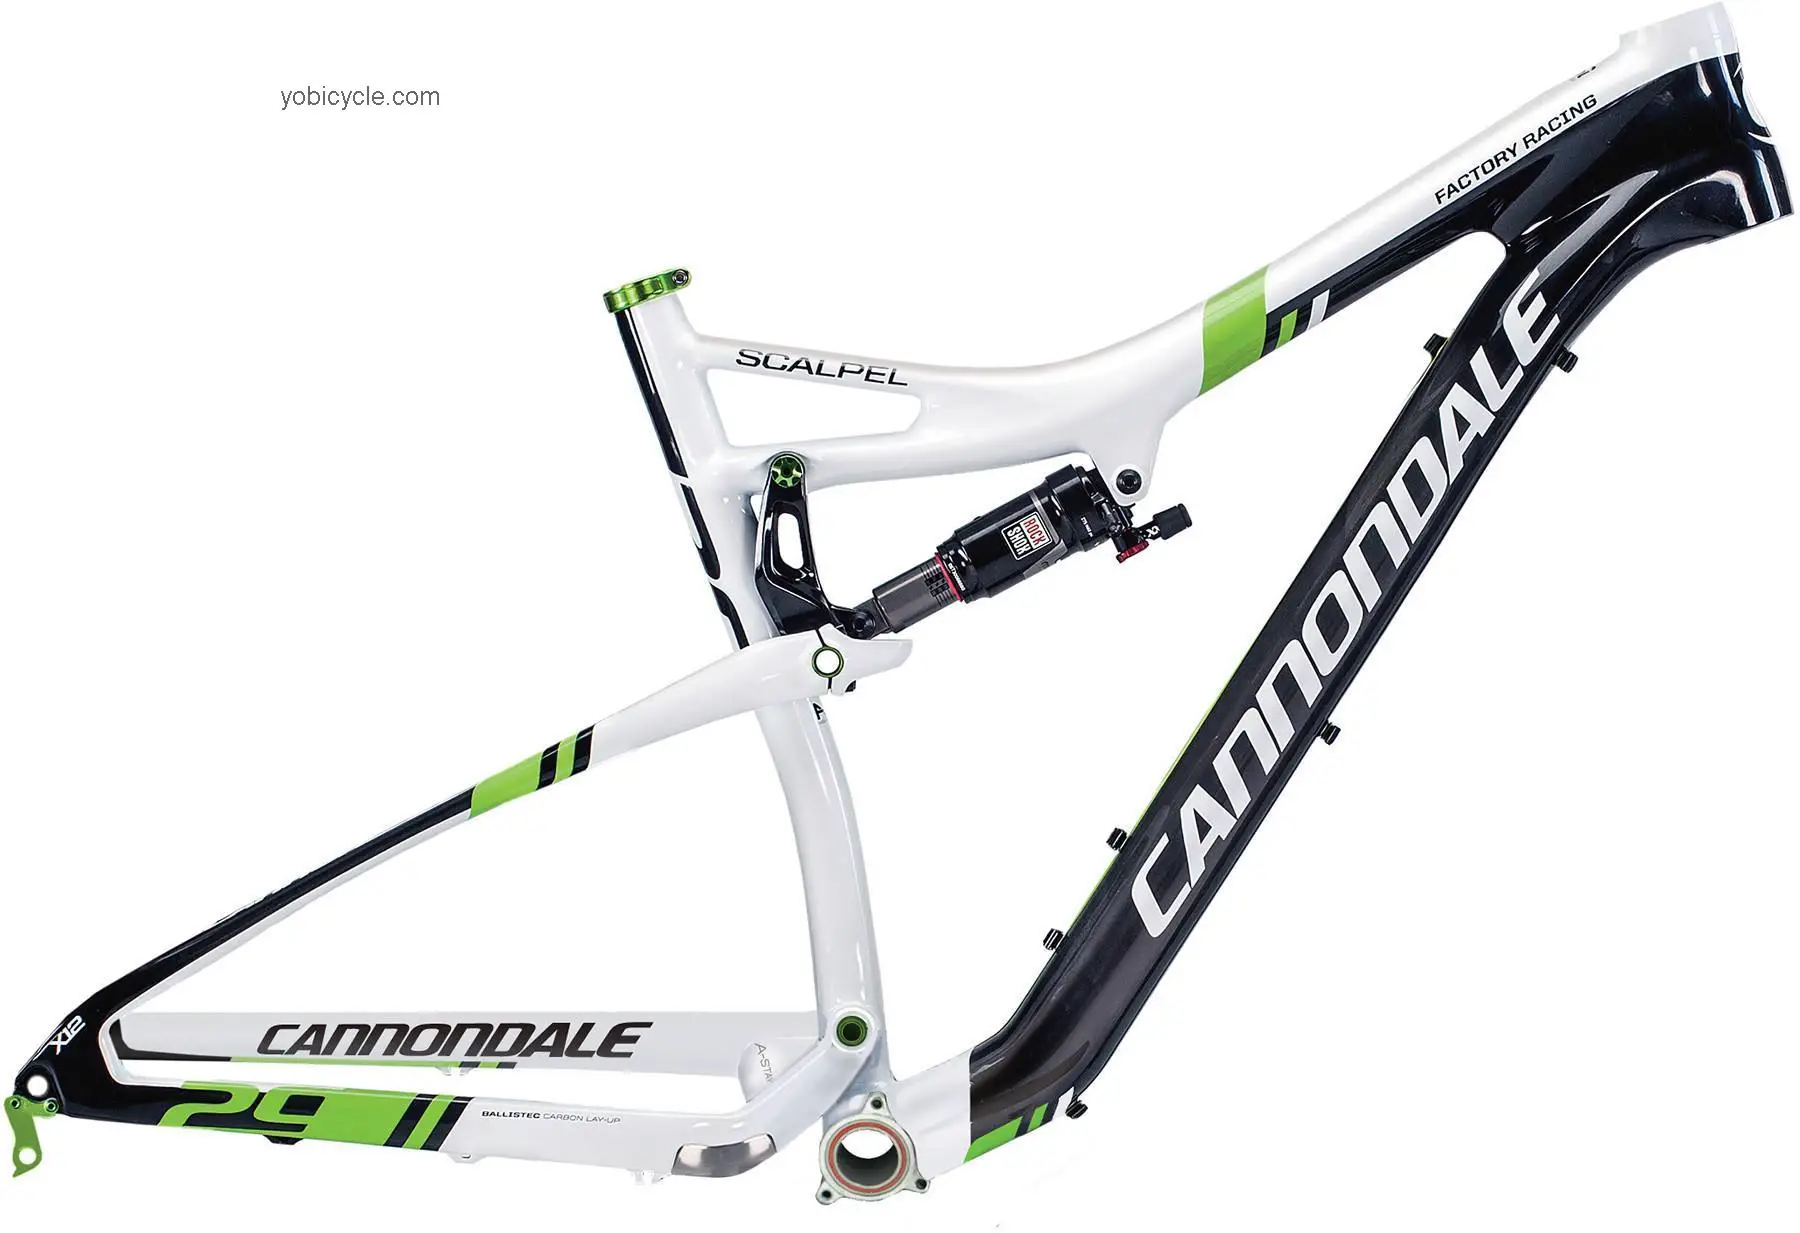 Cannondale  SCALPEL CARBON FRAMESET Technical data and specifications